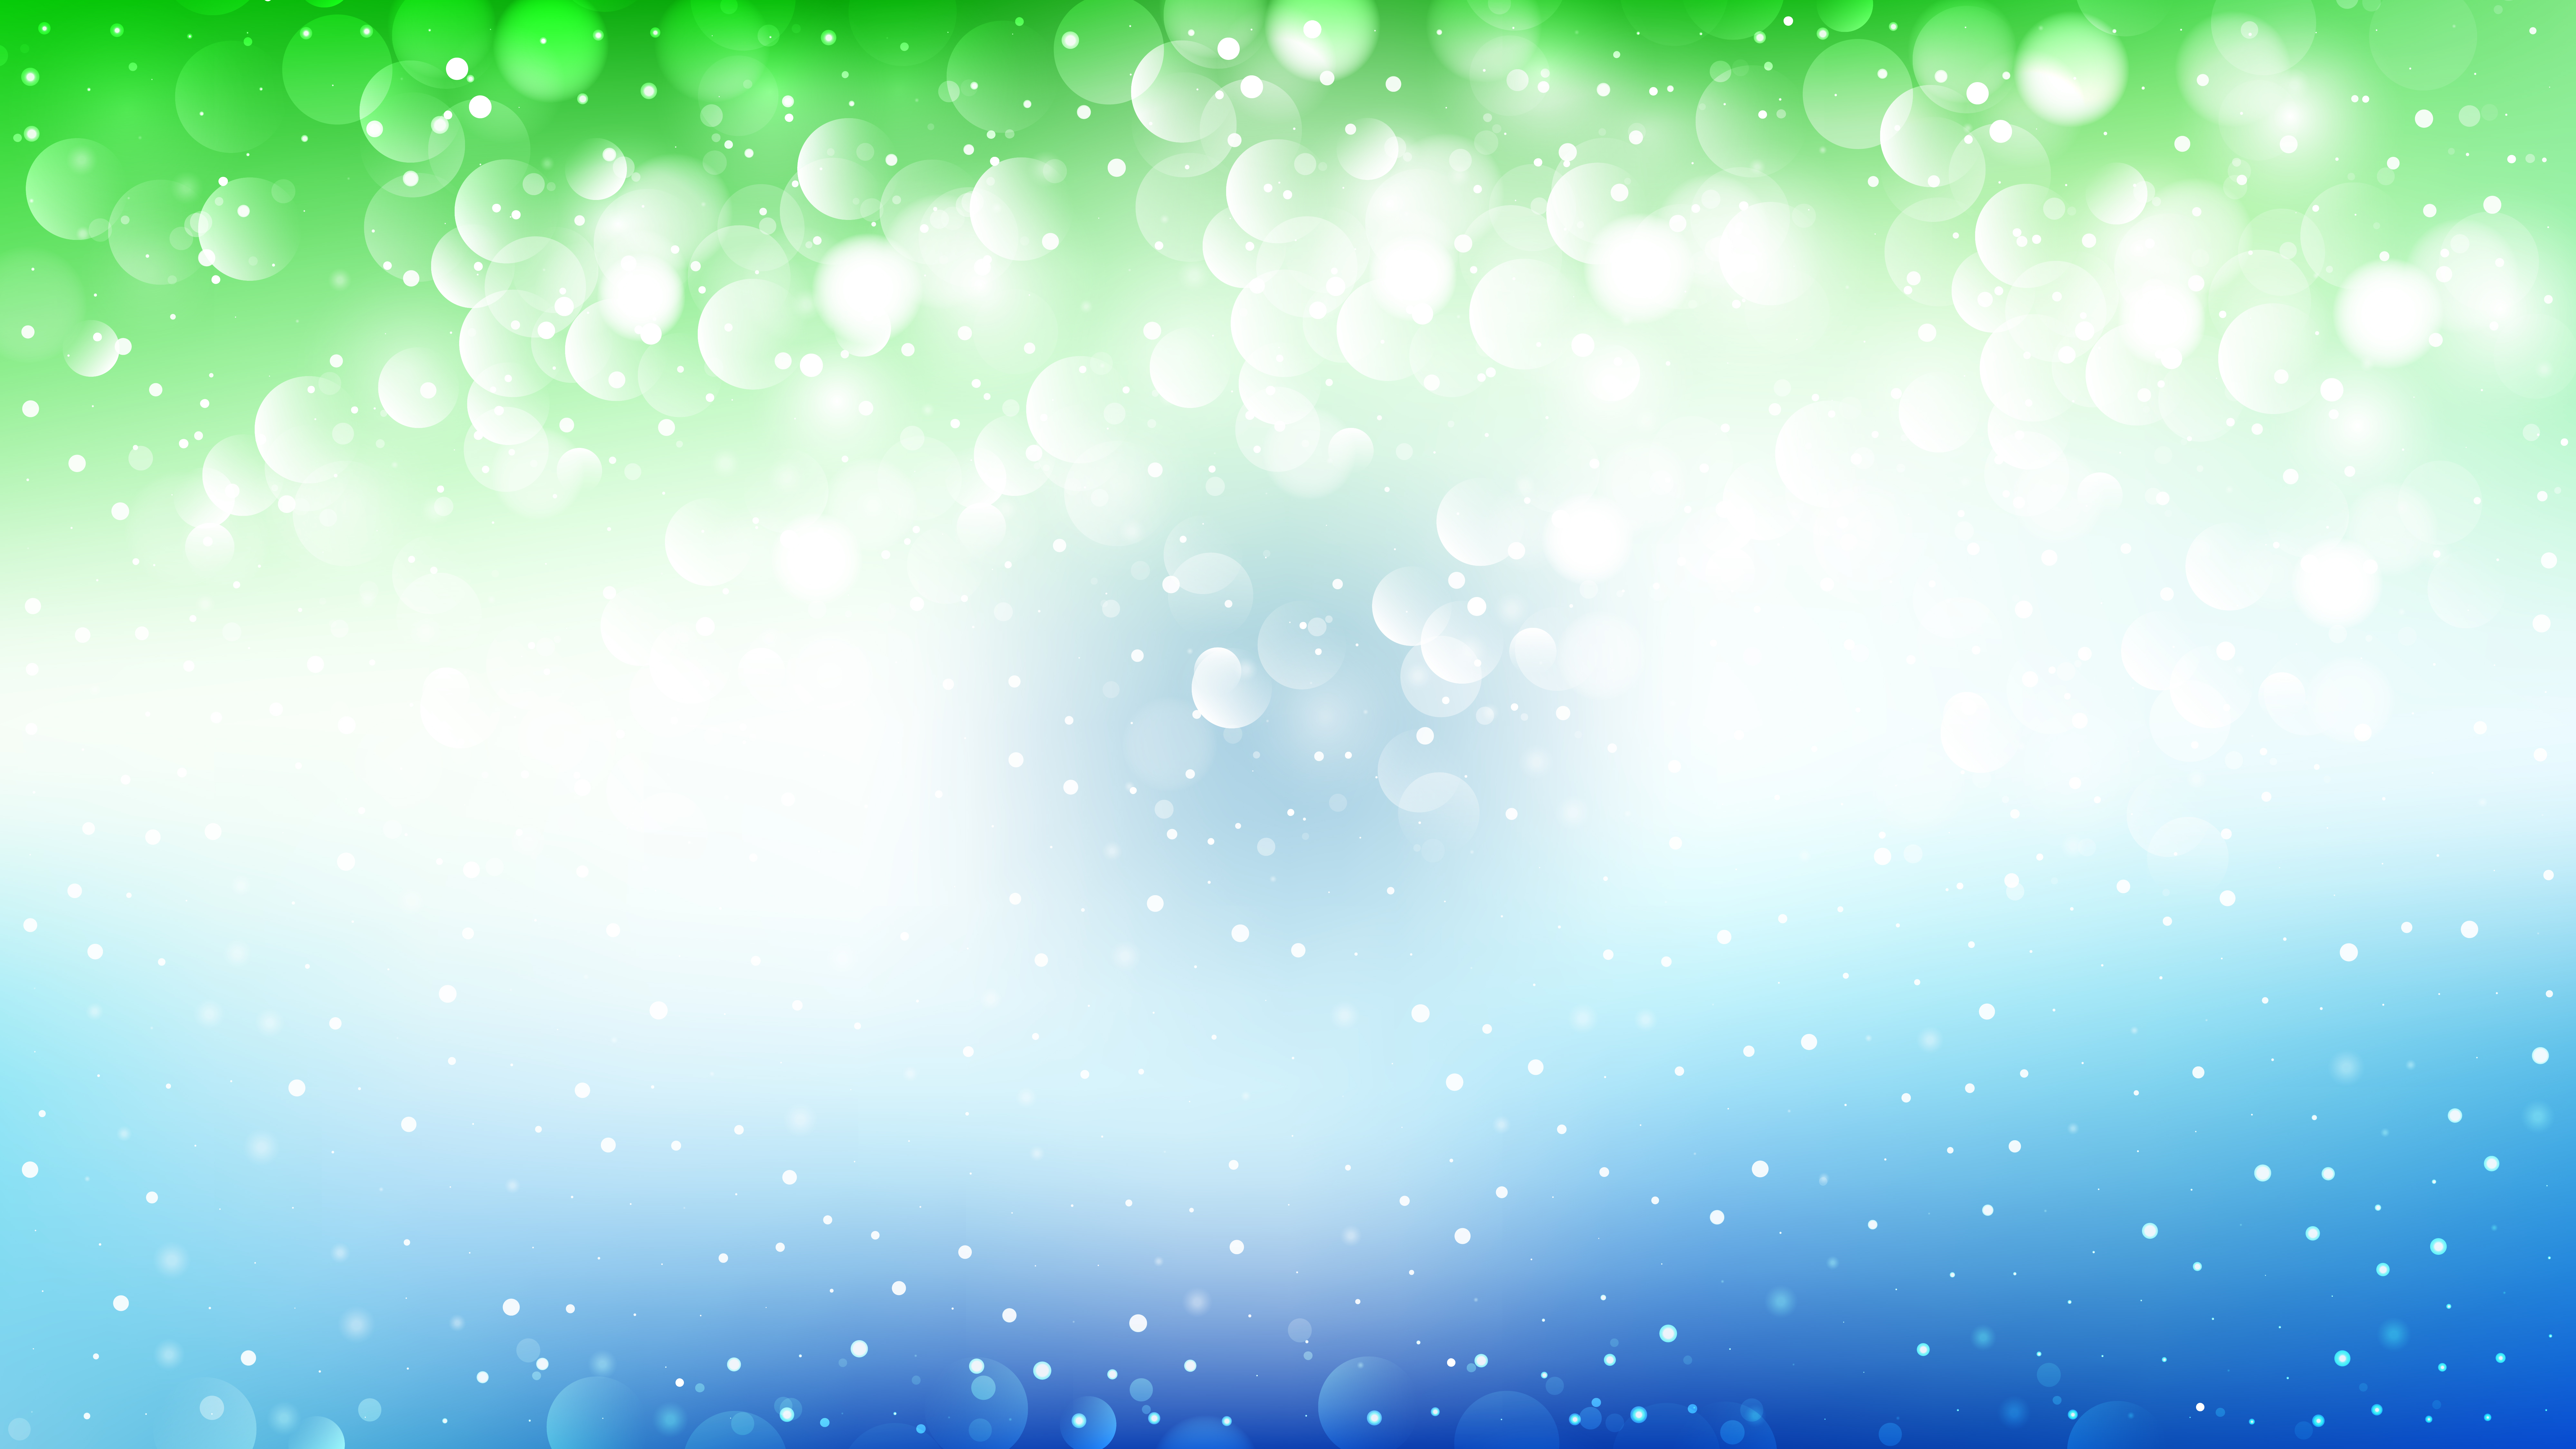 Blue Green Background, Buy Now, Sale, 57% OFF, 